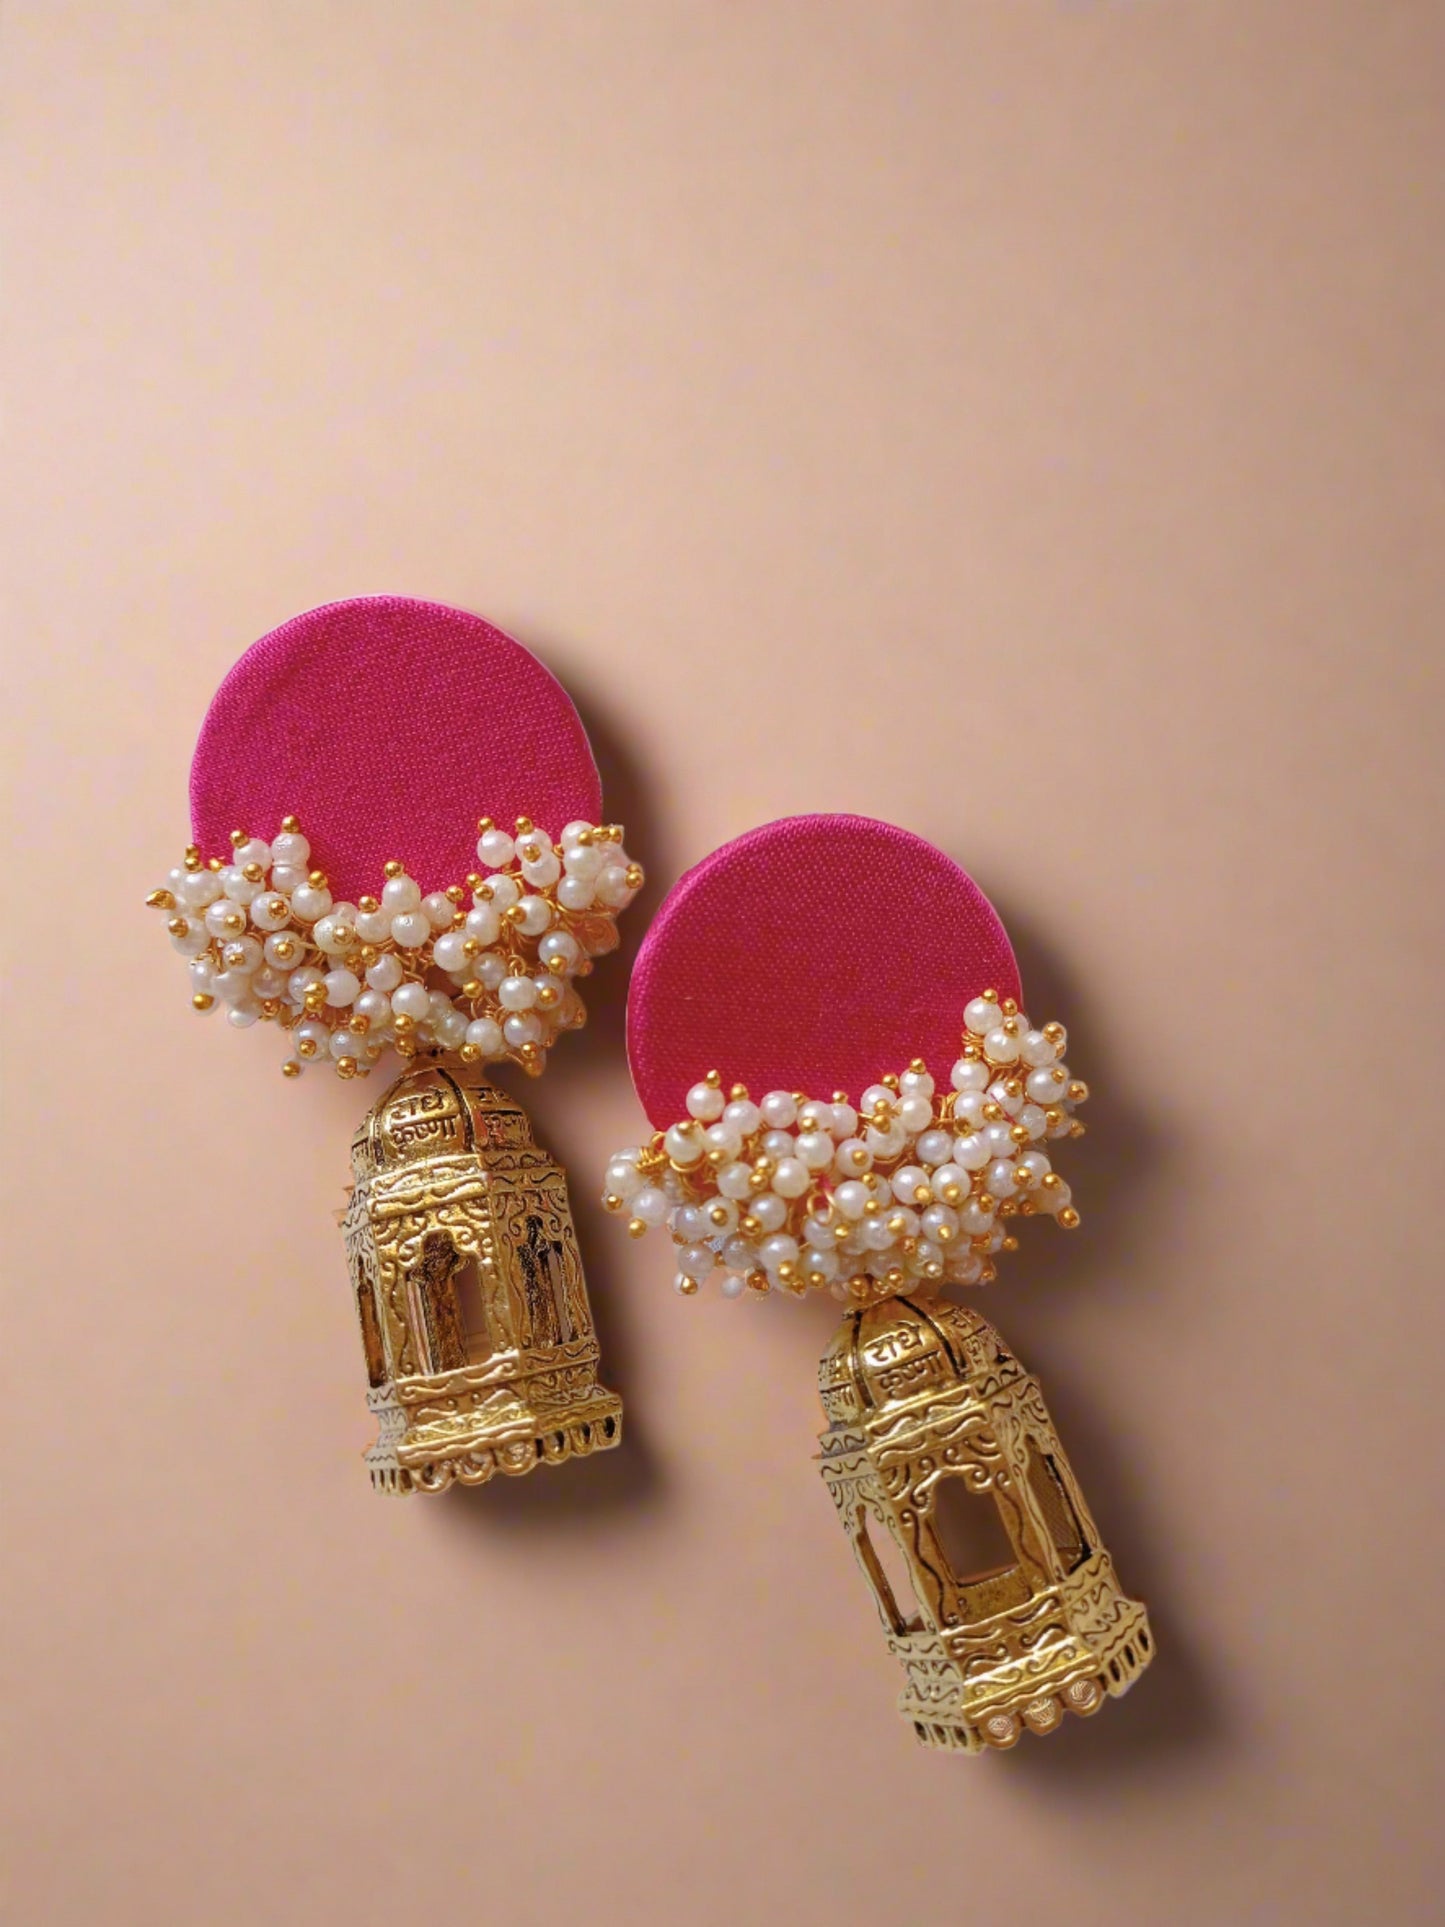 Pink jhumka errings with golden bottom on white backdrop with open book on the right